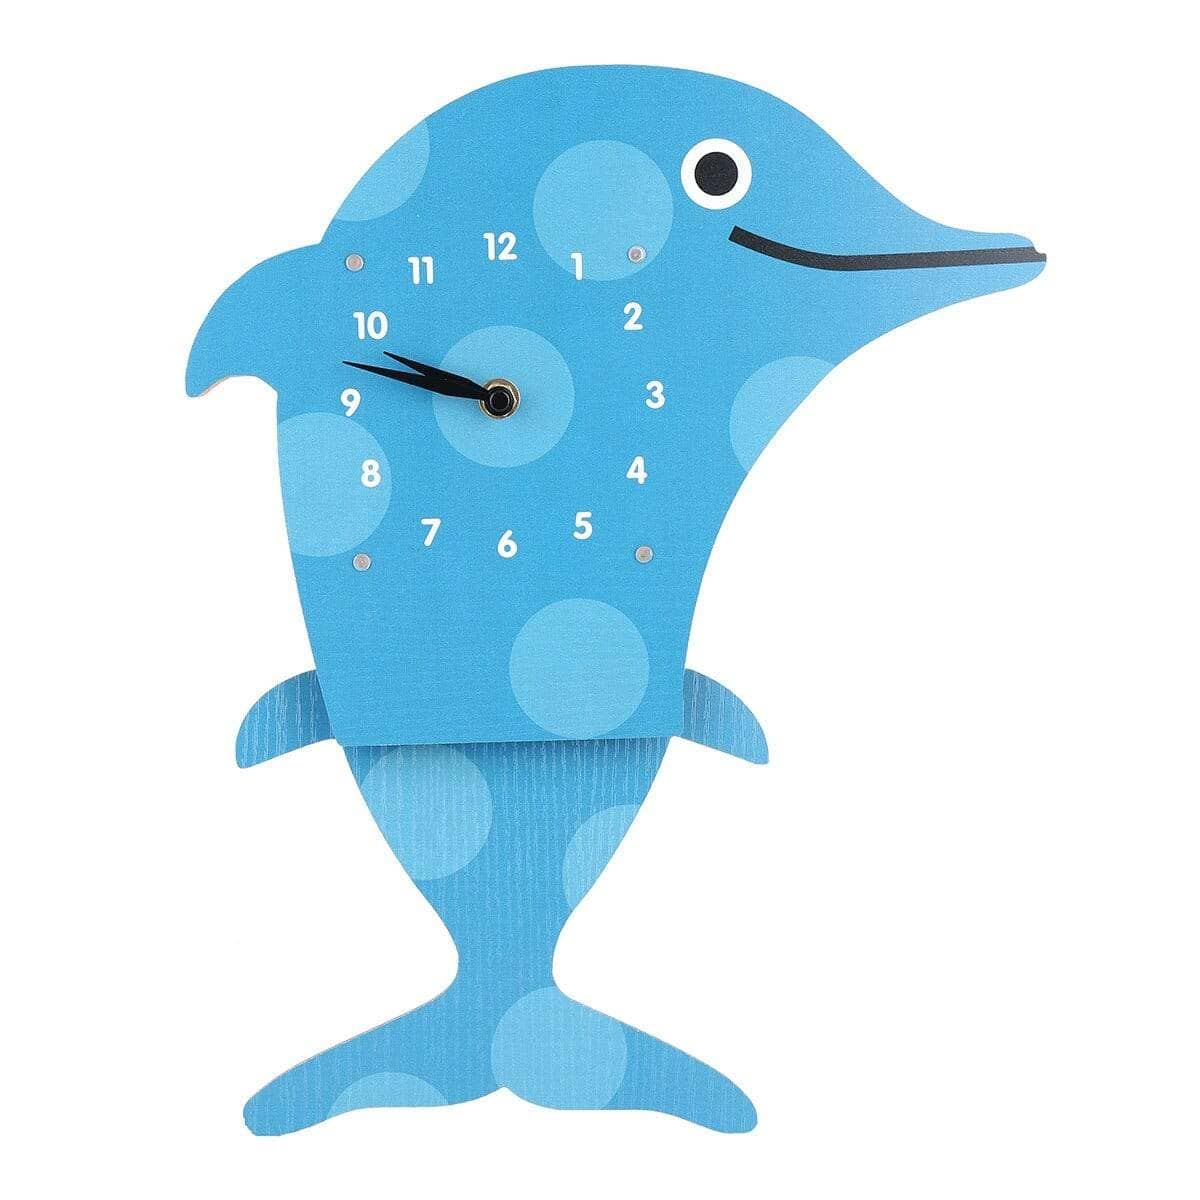 Swinging DolphinKids Bedroom Wall Clocks: Fun and Whimsical Decor